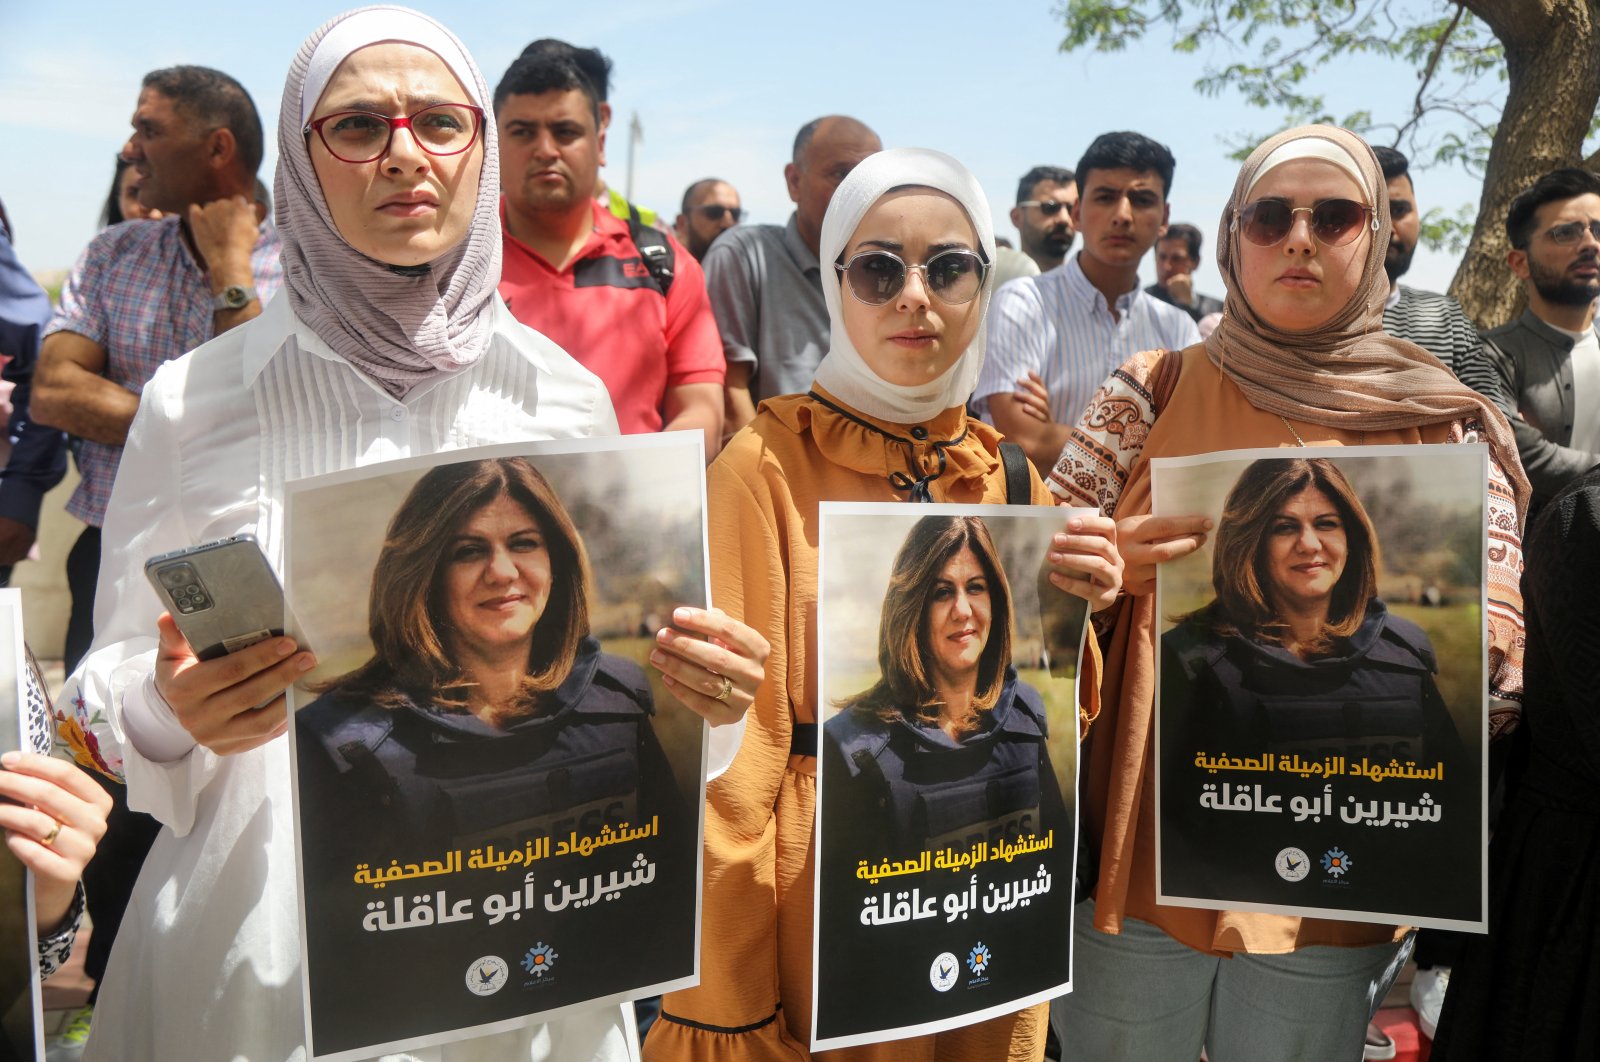 Palestinians hold pictures of Al-Jazeera reporter Shireen Abu Akleh, who was killed by Israeli army gunfire during an Israeli raid, in the occupied West Bank, Palestine, May 11, 2022. (Reuters Photo)